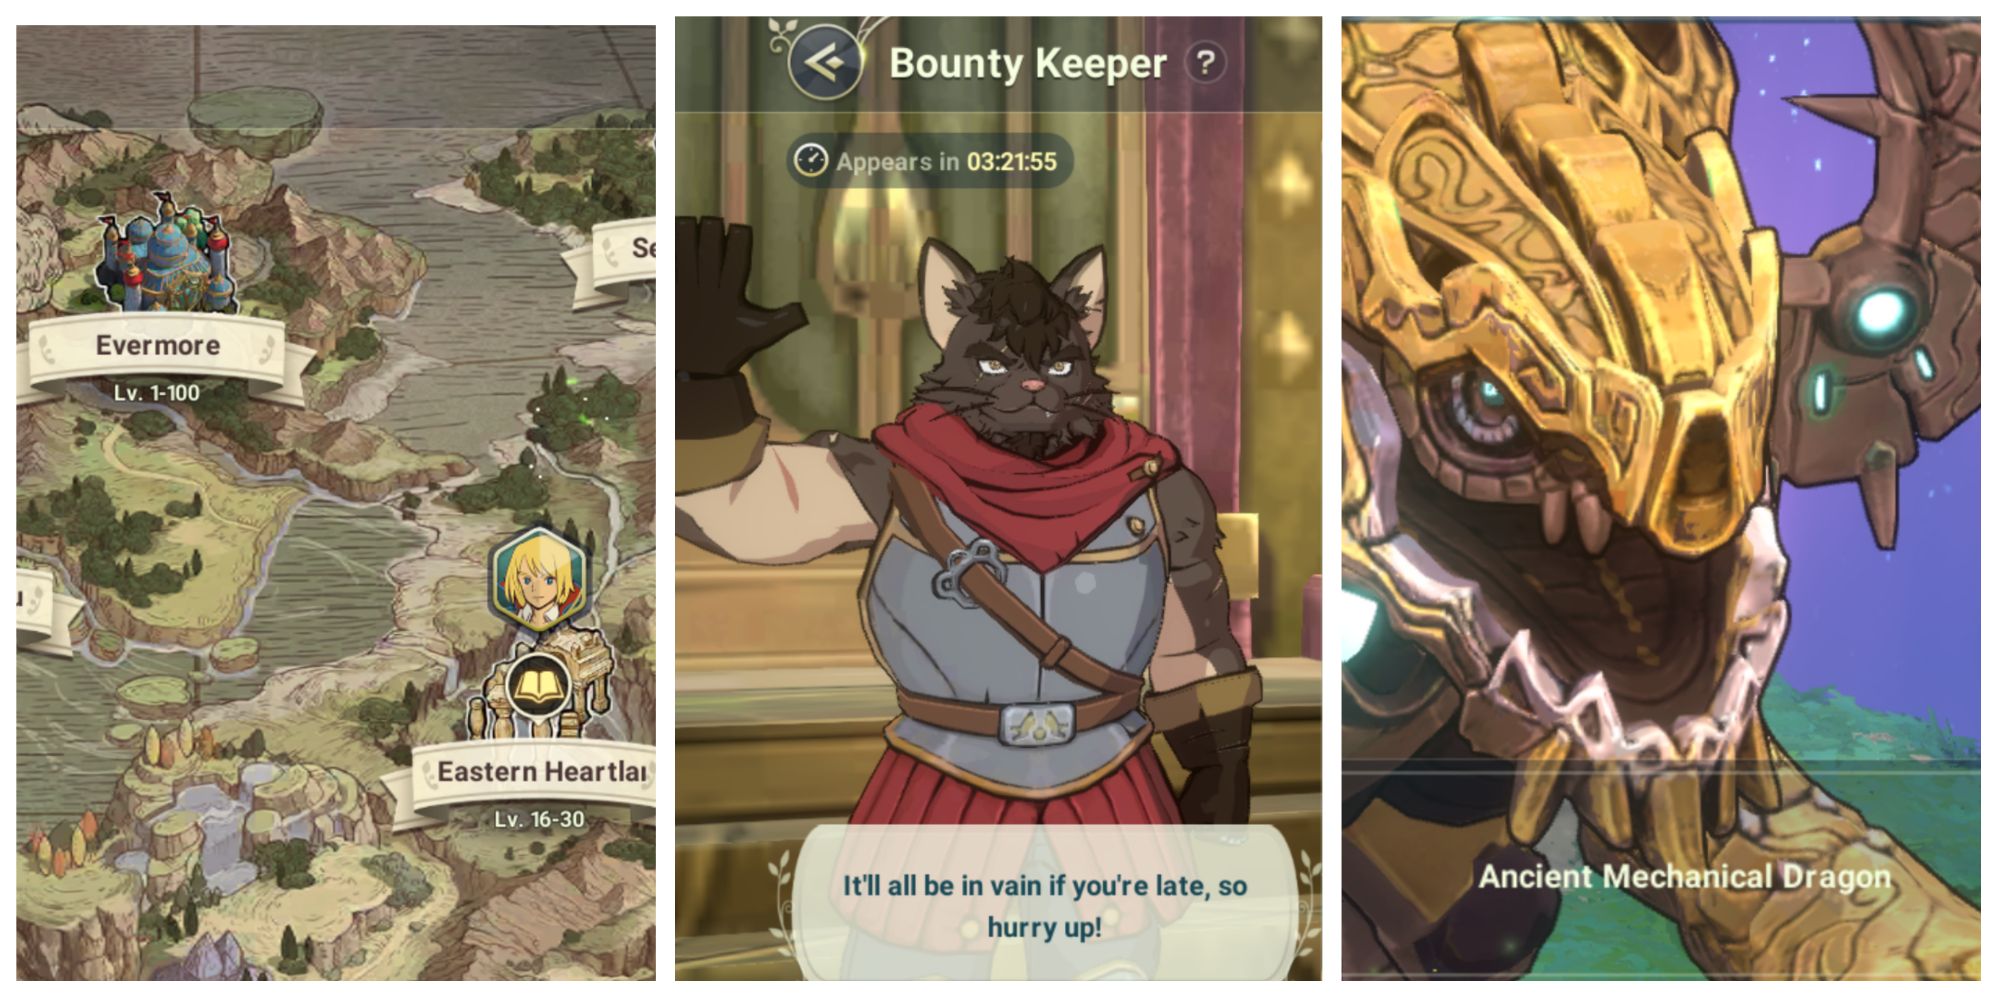 Split feature image featuring screenshots of the world map, Jackson the Bounty Keeper, and the Mecharagon